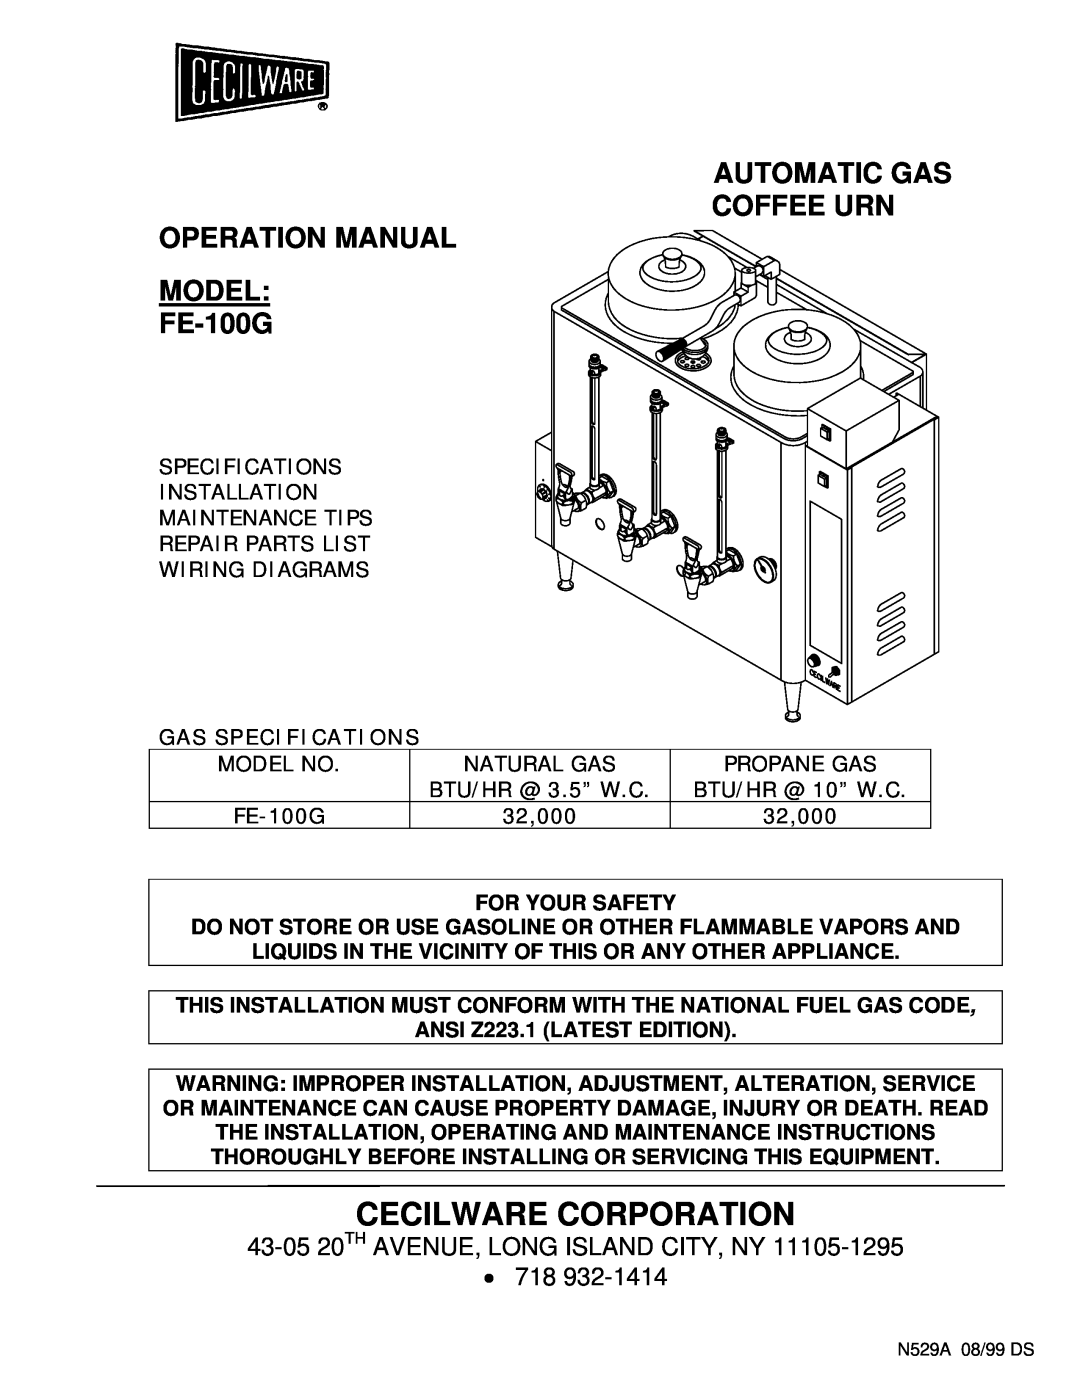 Cecilware FE-100G operation manual Gas Specifications, Cecilware Corporation, 43-0520TH AVENUE, LONG ISLAND CITY, NY 